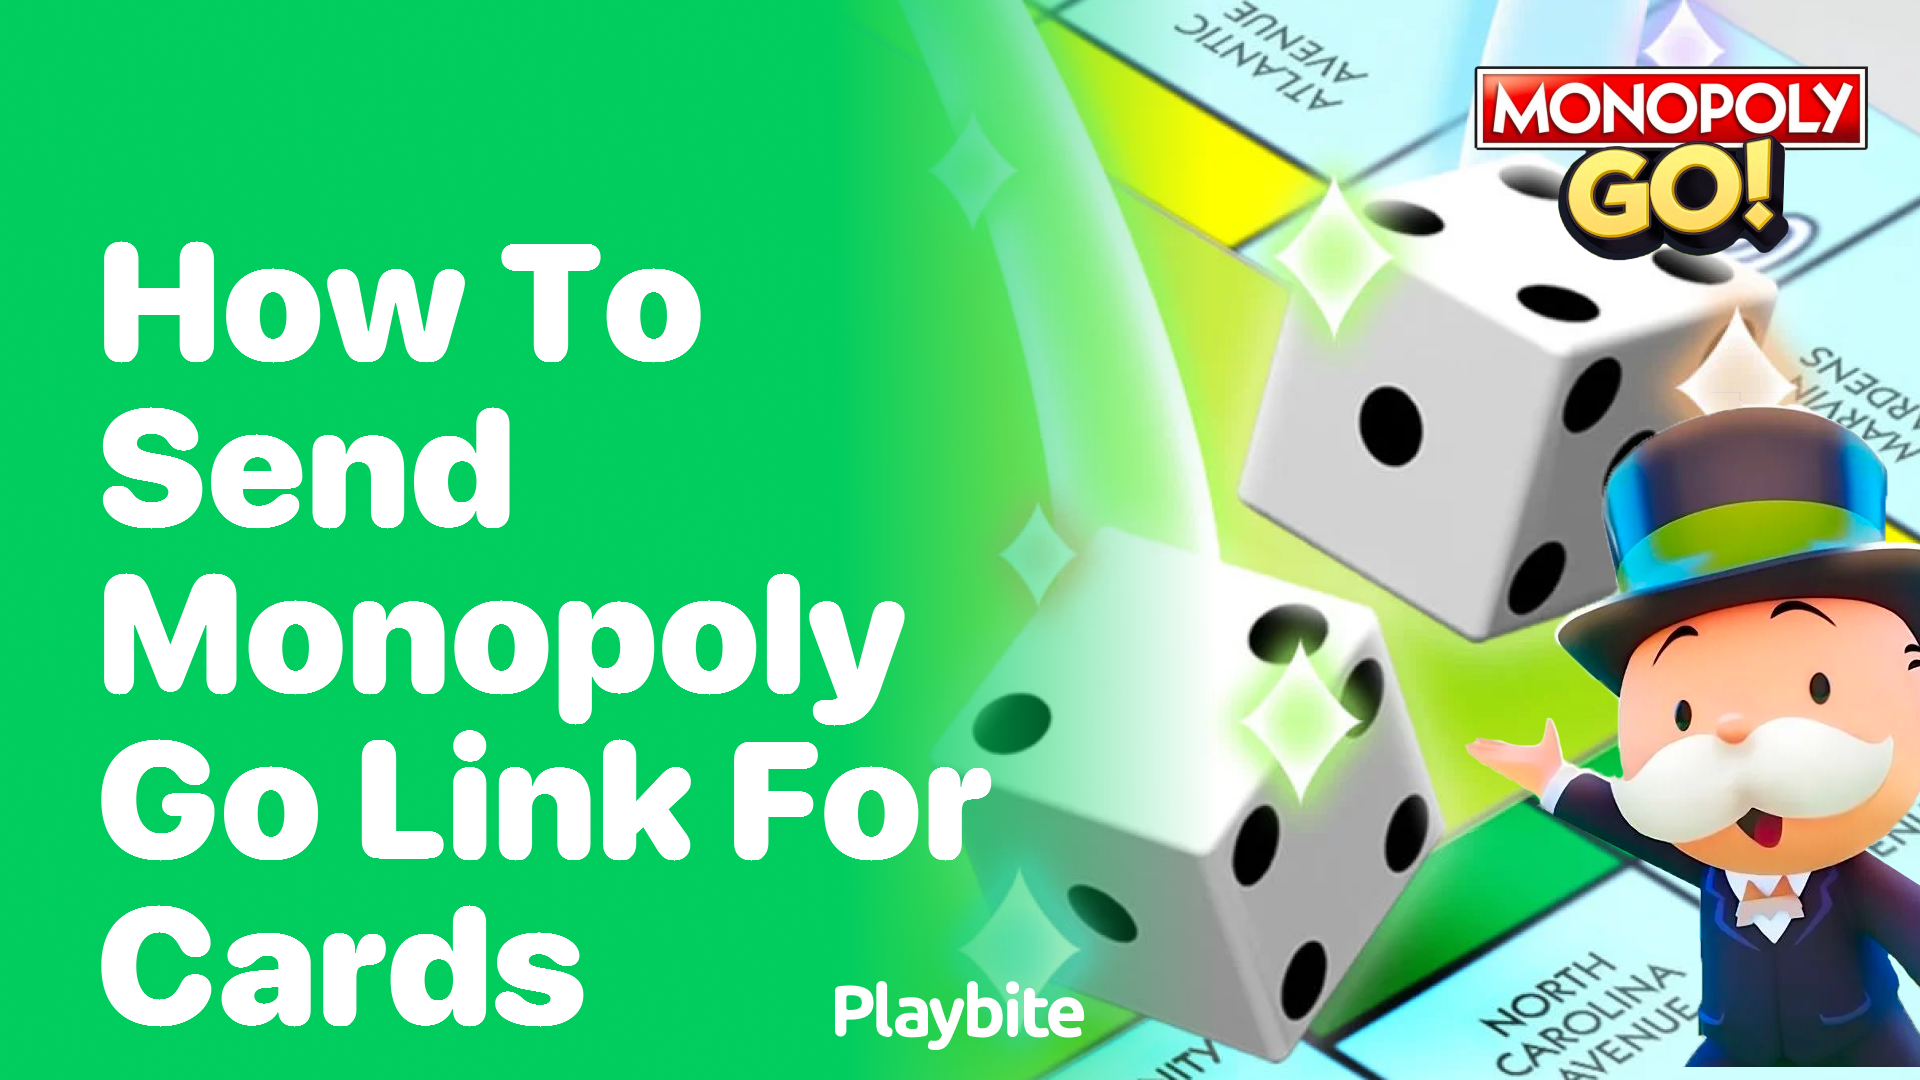 How to Send Monopoly Go Link for Cards